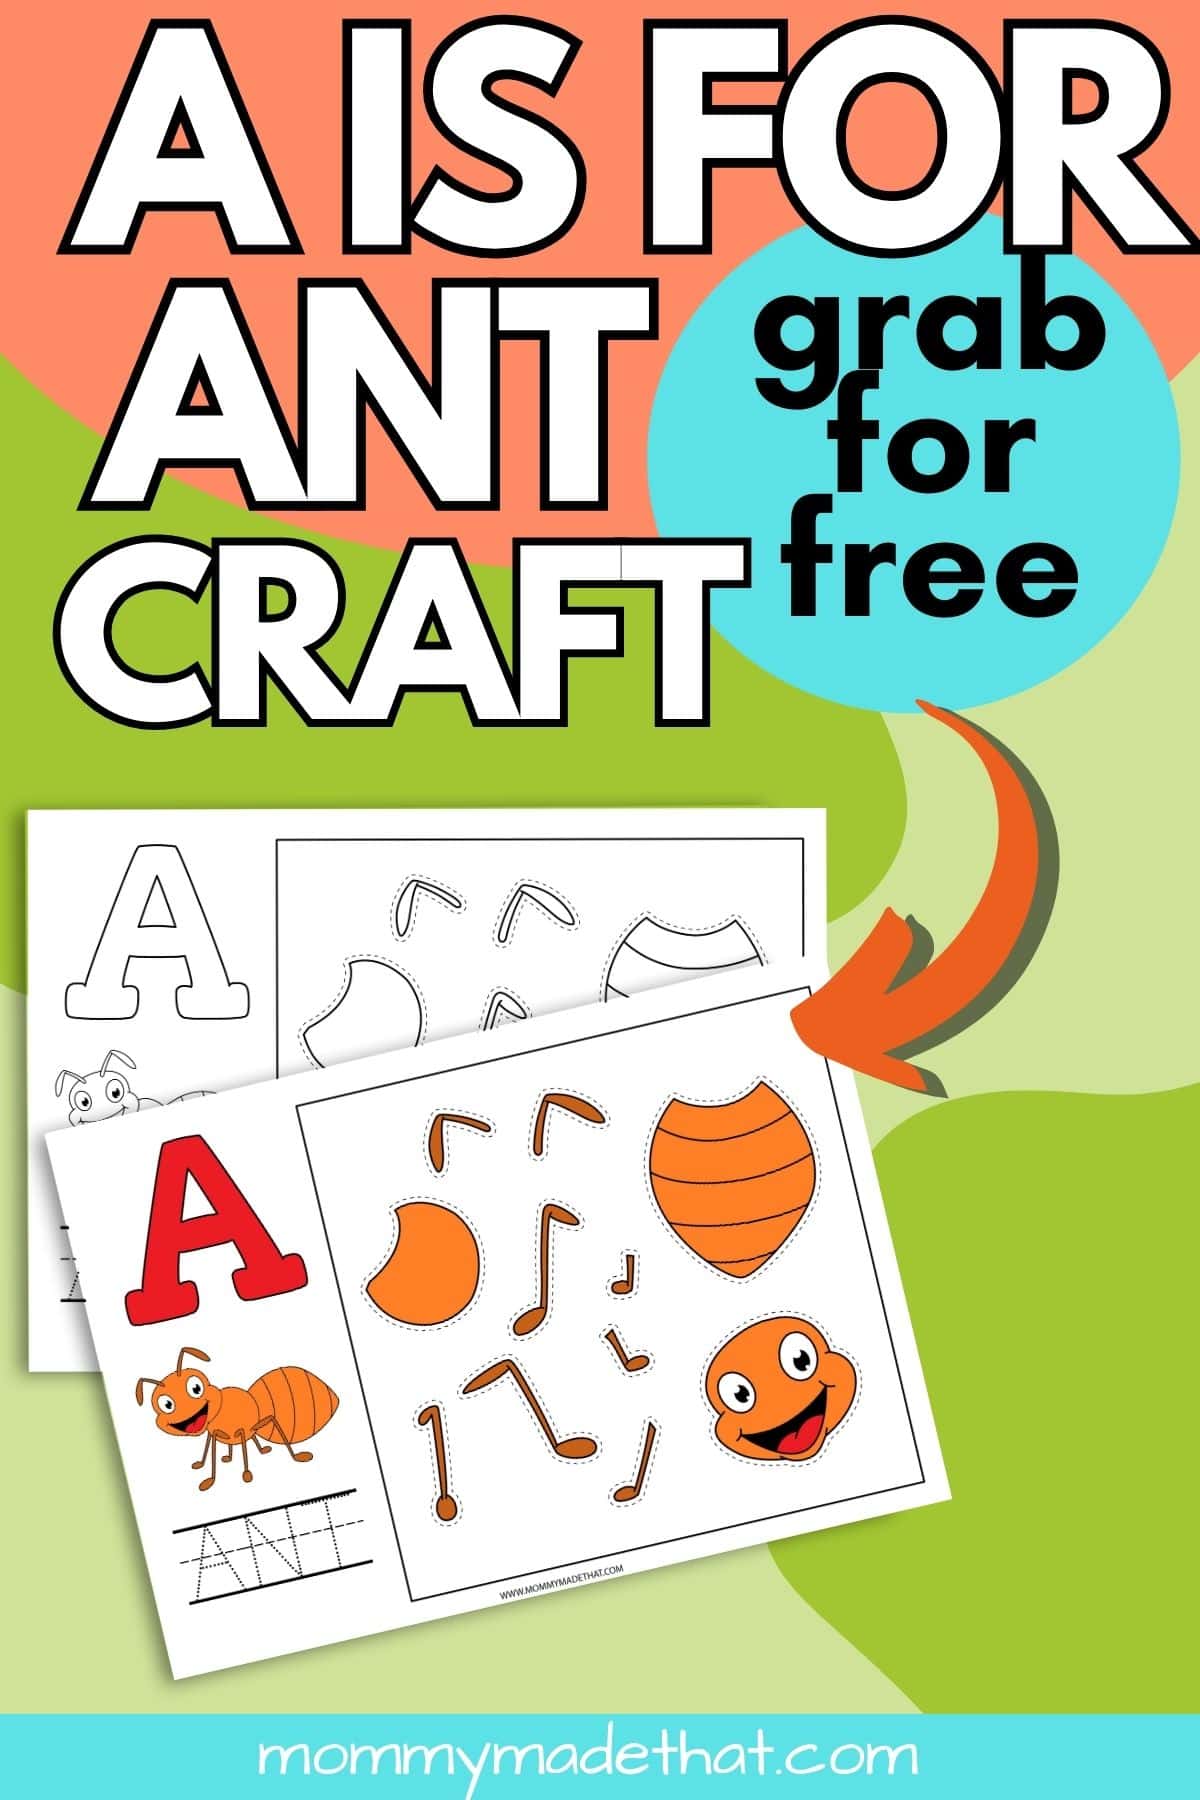 a is for ant craft, a fun and easy alphabet craft for preschoolers and younger kids